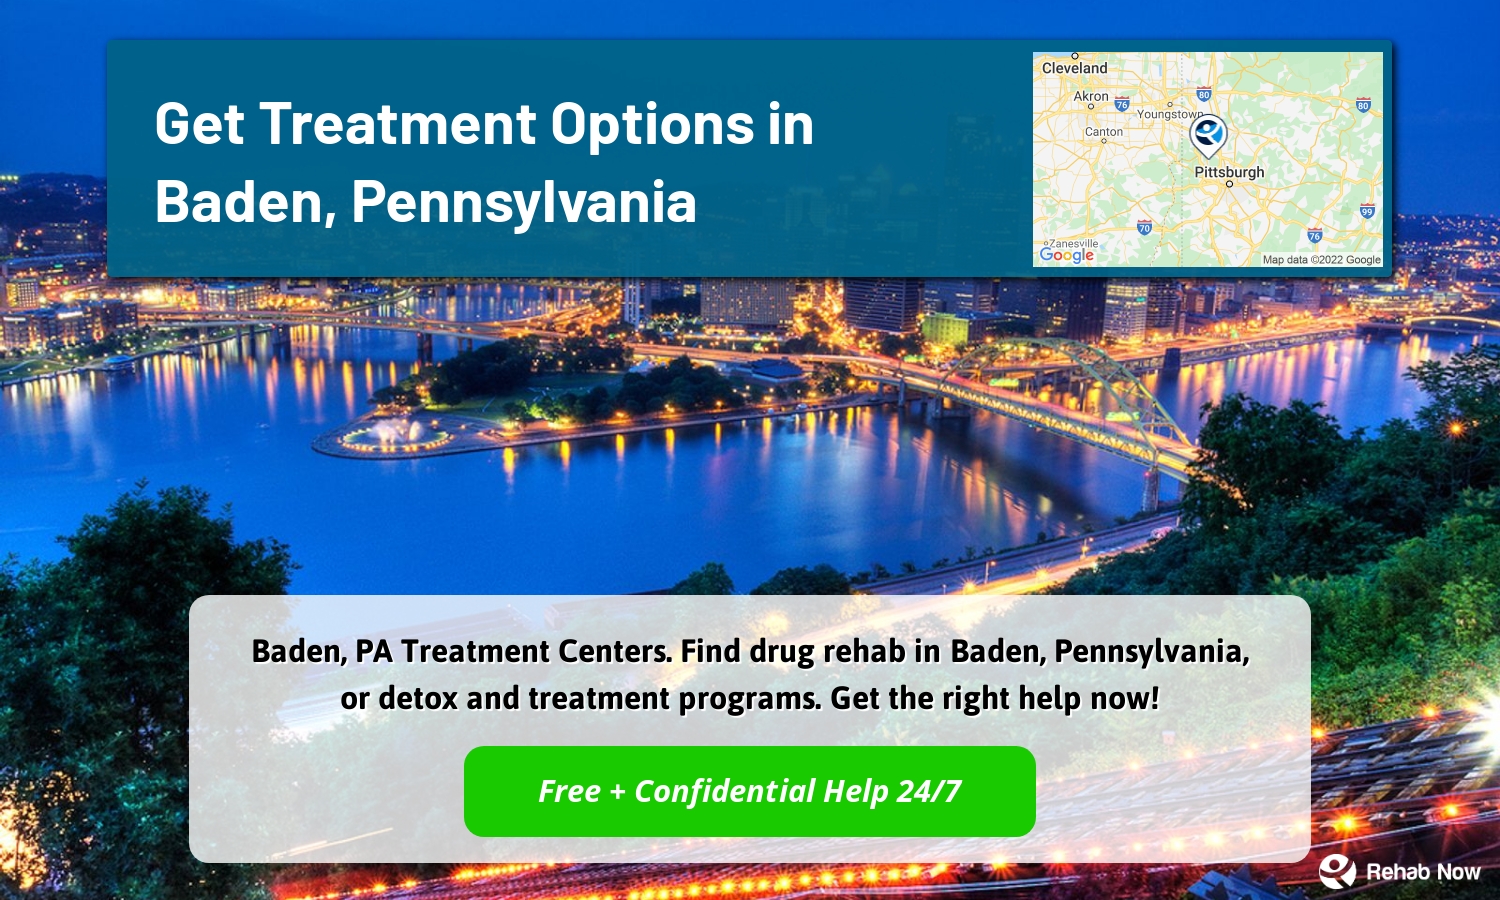 Baden, PA Treatment Centers. Find drug rehab in Baden, Pennsylvania, or detox and treatment programs. Get the right help now!